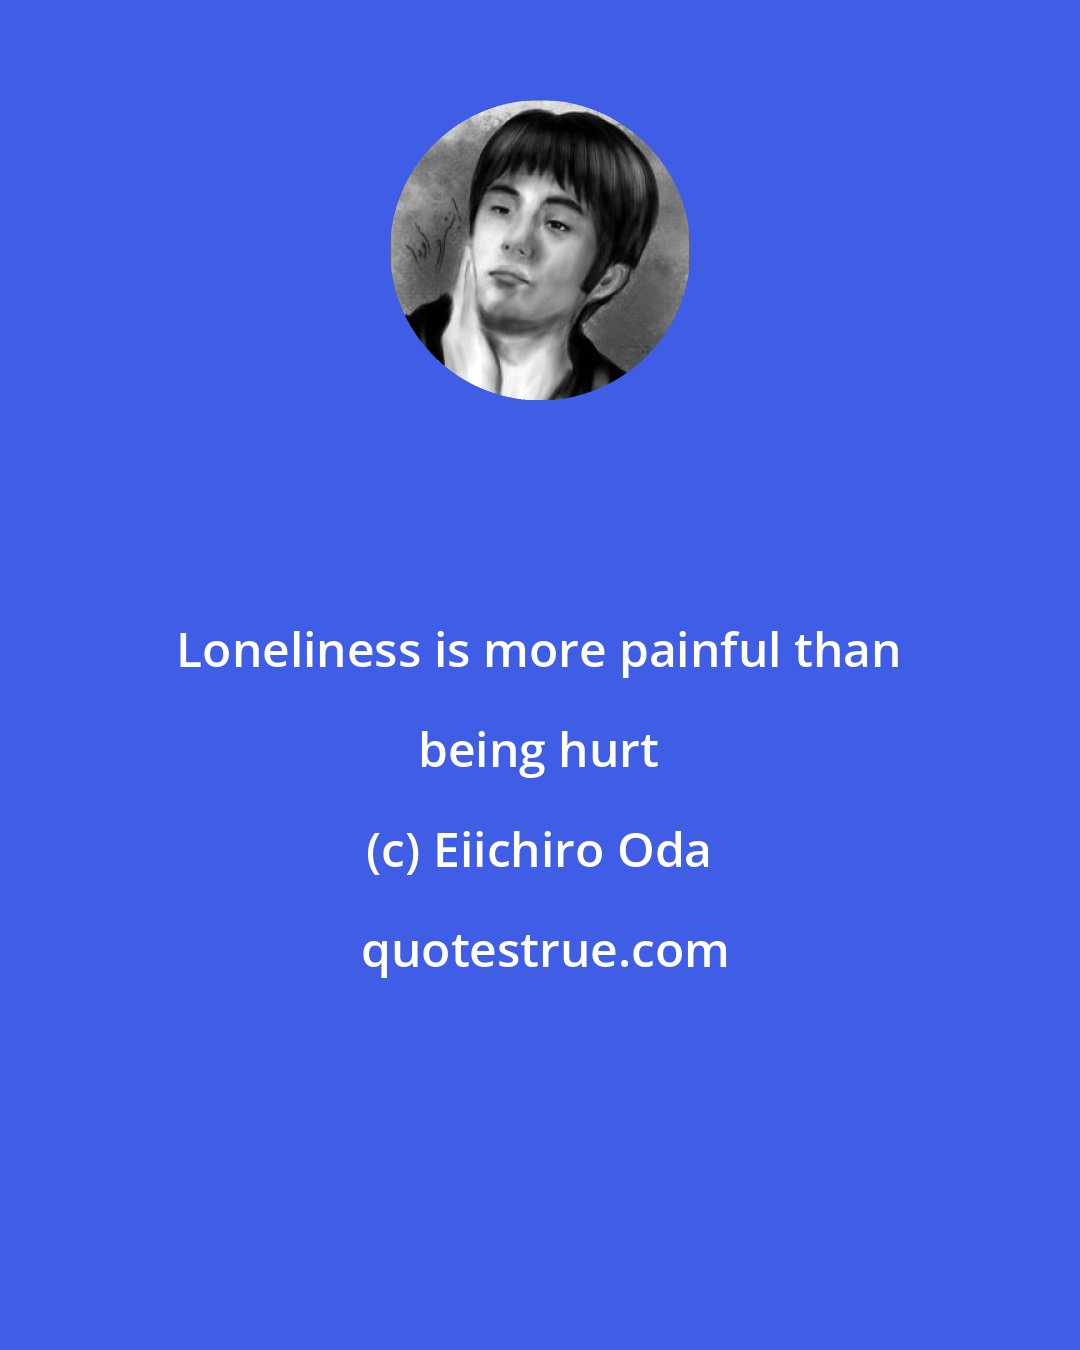 Eiichiro Oda: Loneliness is more painful than being hurt